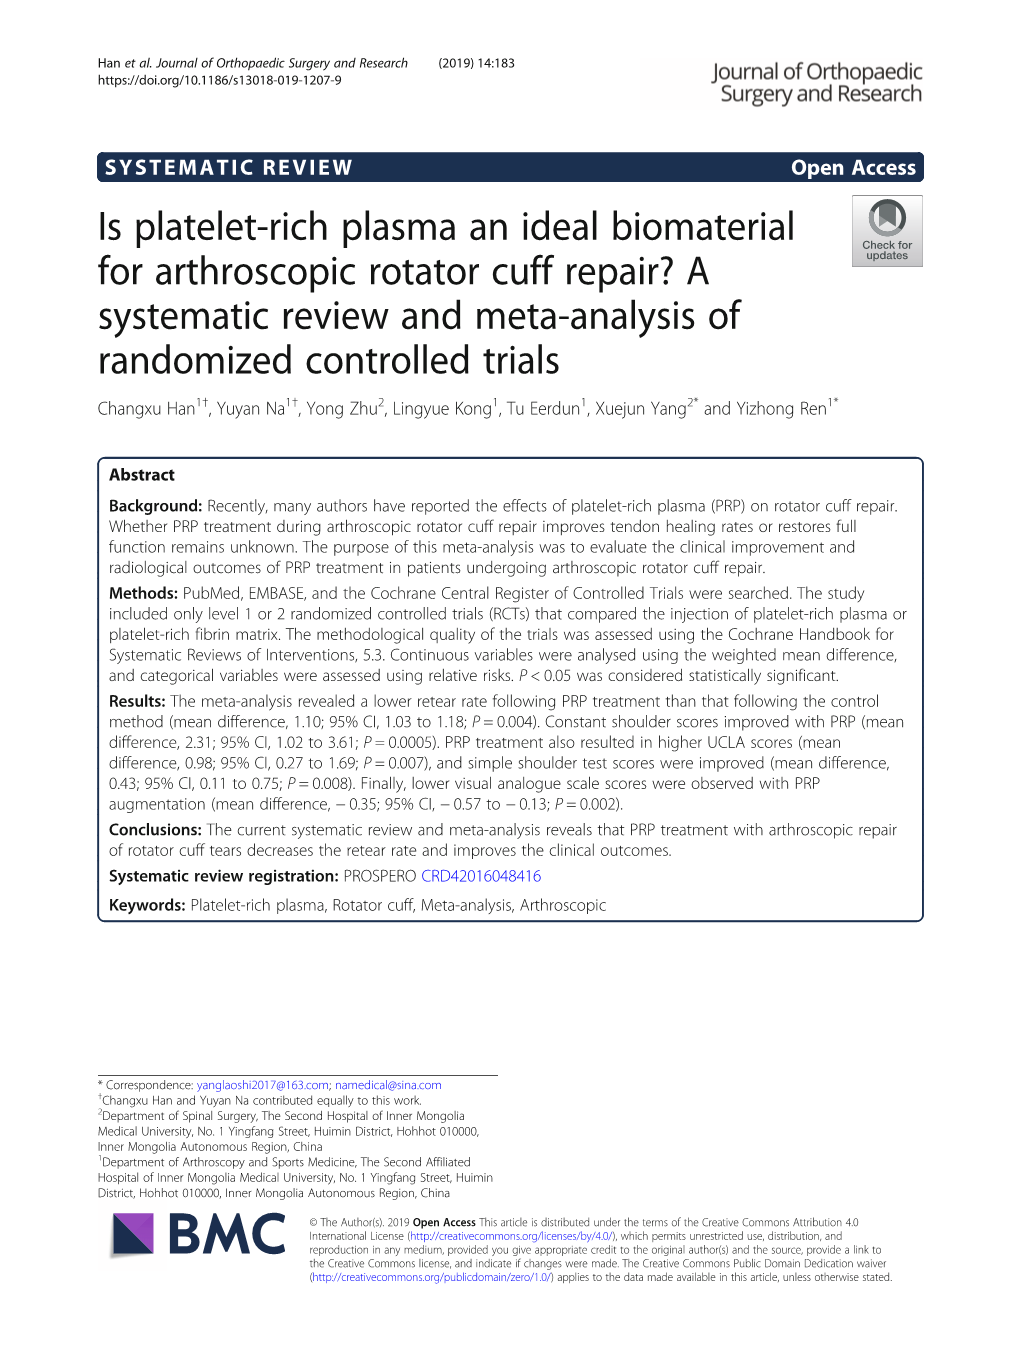 Is Platelet-Rich Plasma an Ideal Biomaterial for Arthroscopic Rotator